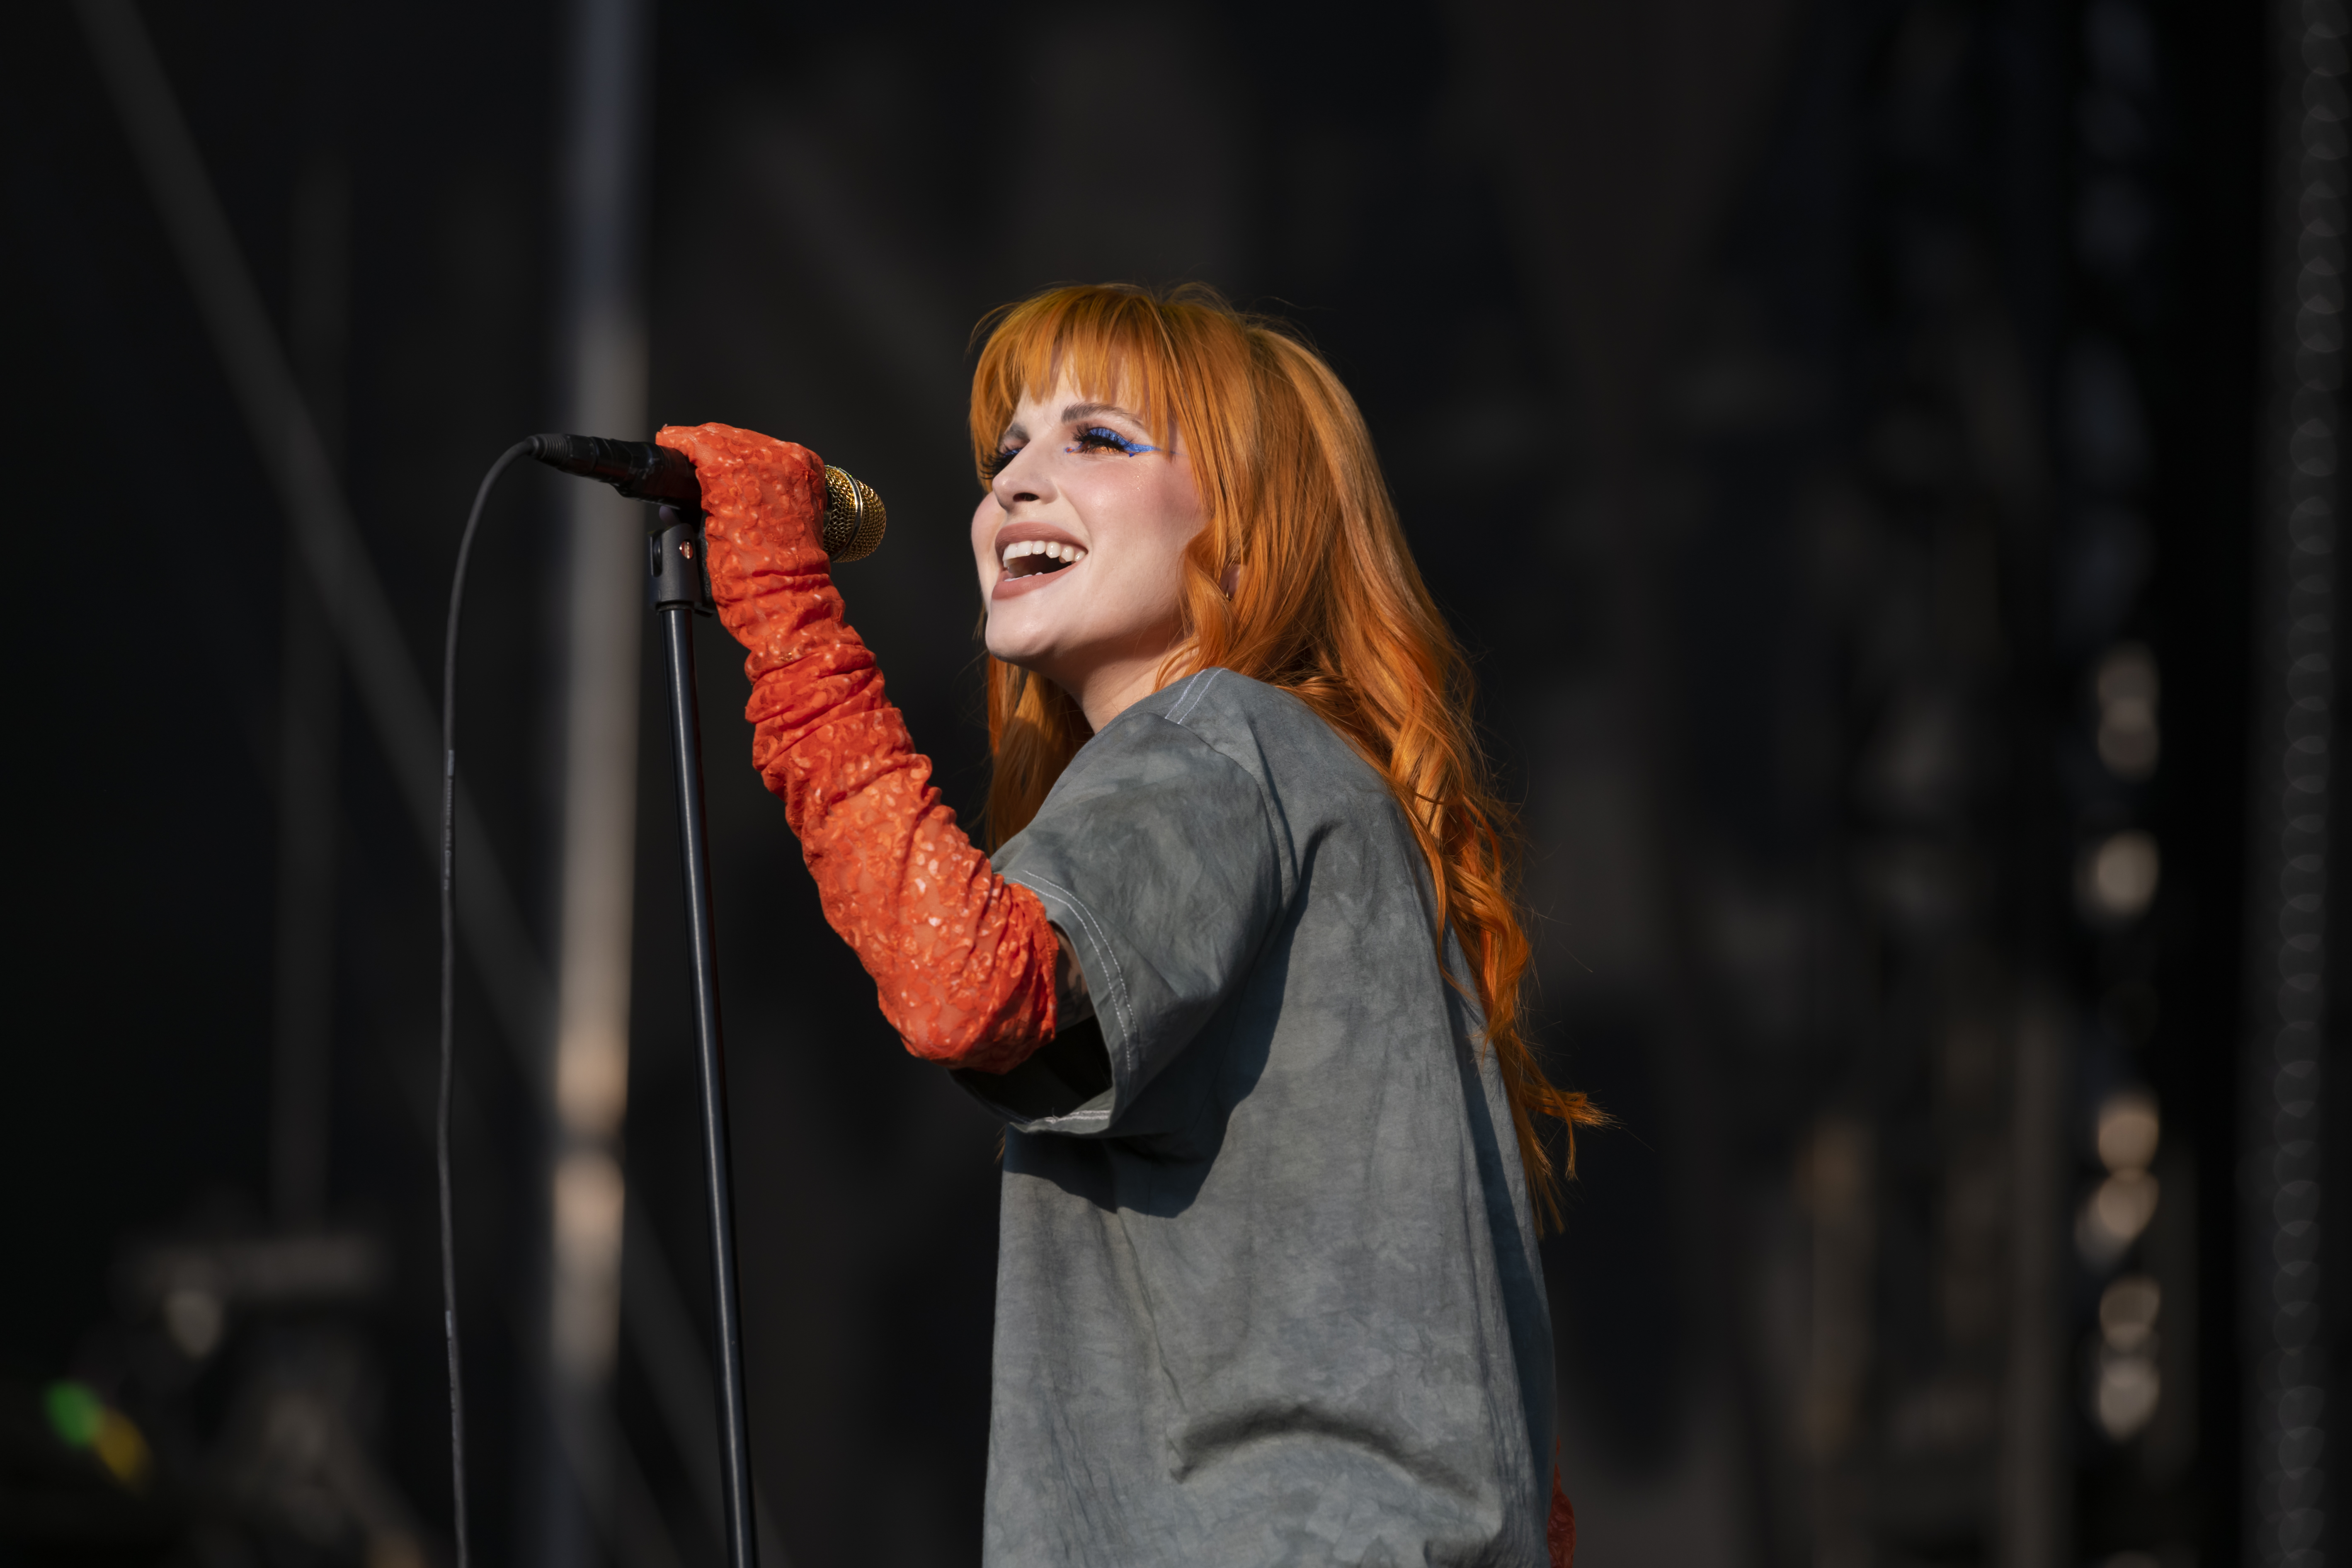 https://www.lifeandstylemag.com/wp-content/uploads/2023/06/Hayley-Williams-Dating-History.jpg?fit=5674%2C3783&quality=86&strip=all